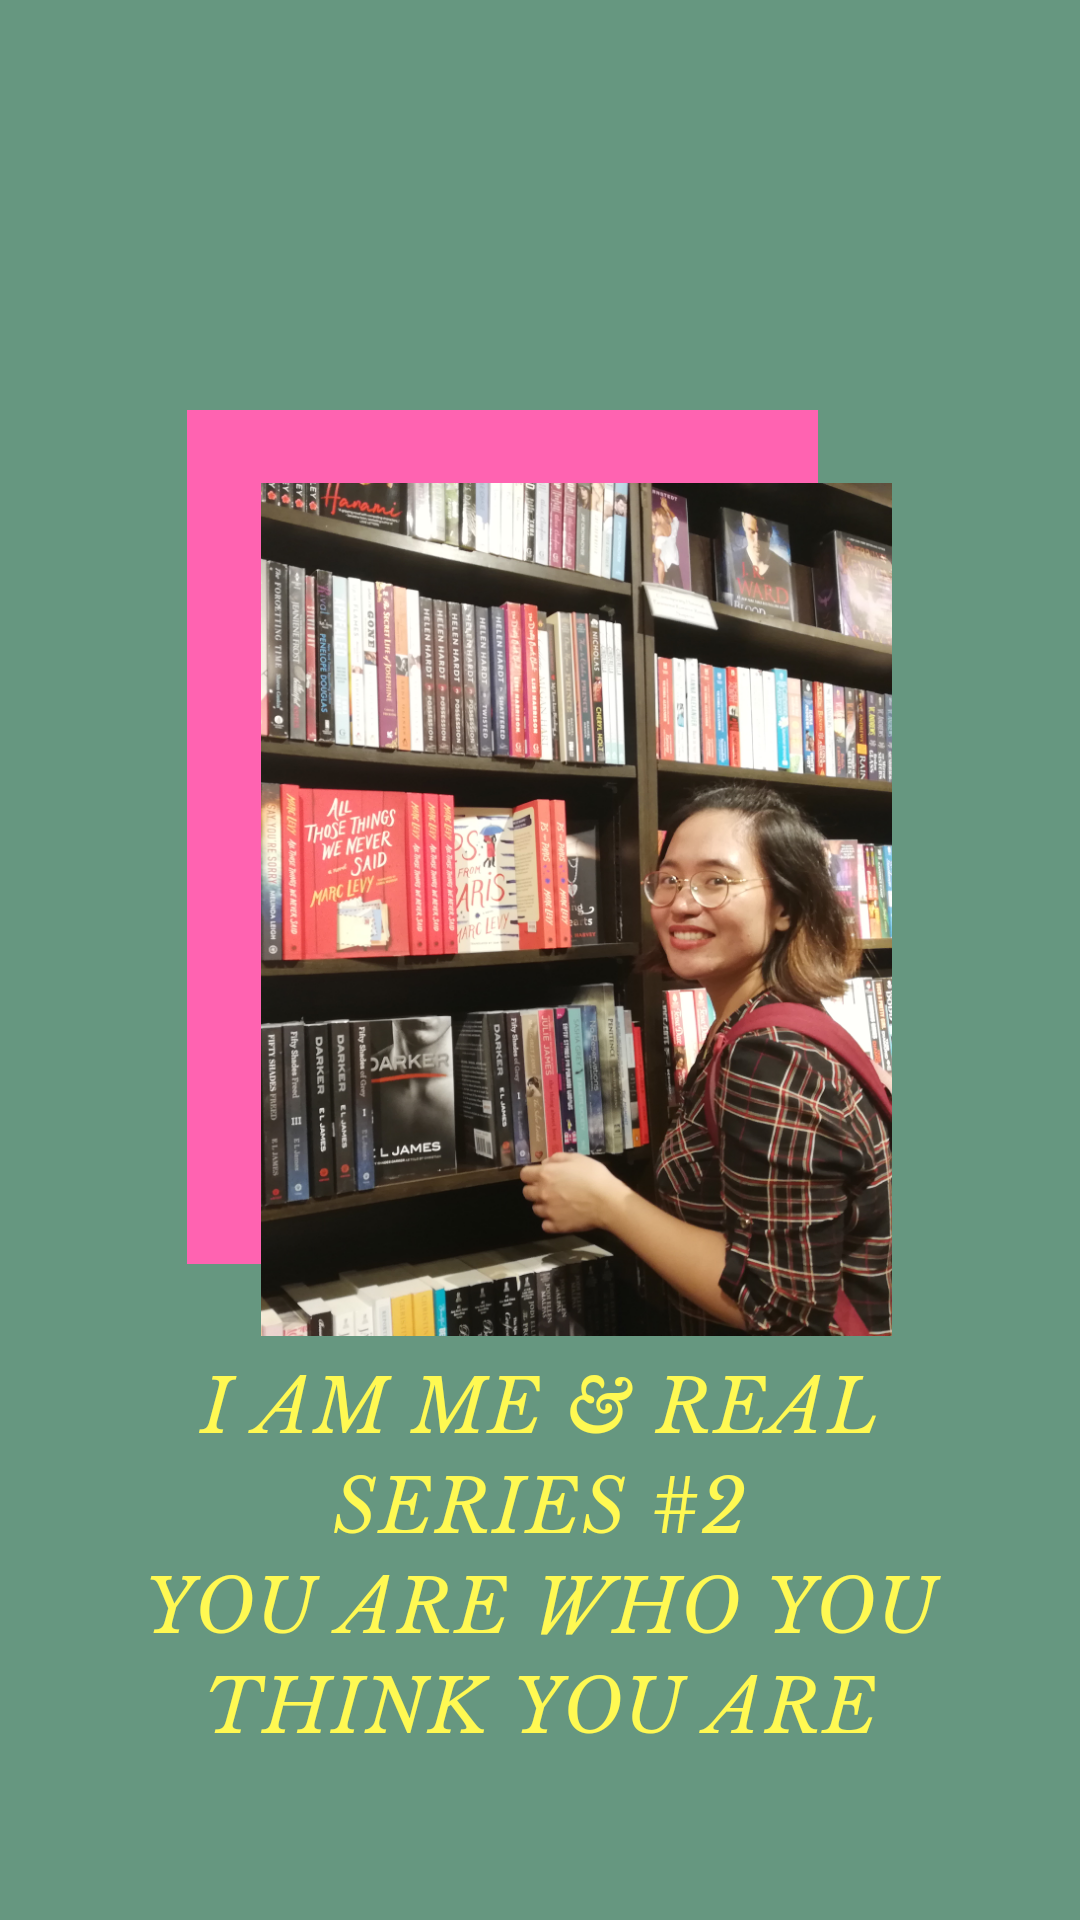 I  AM ME & REAL series #2: You are who you thought you are.